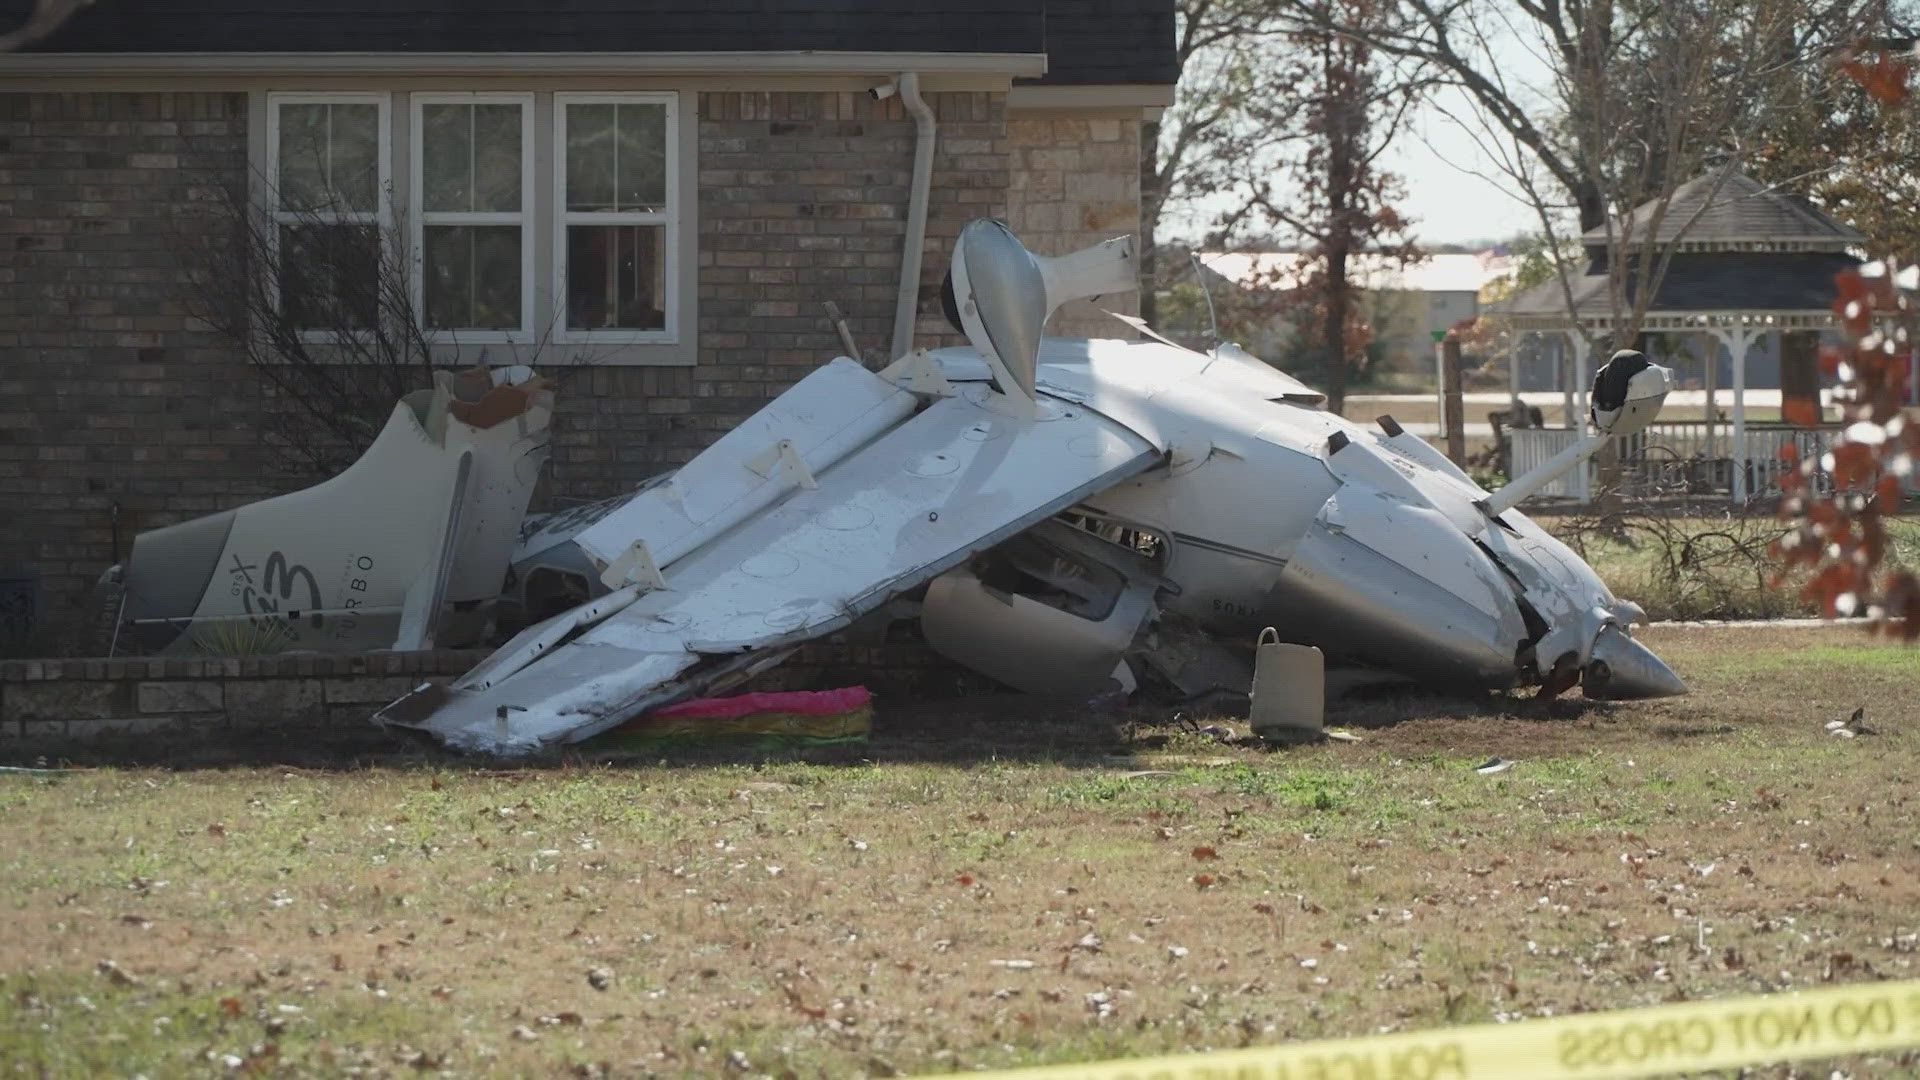 The pilot of a small plane has been pronounced dead after their aircraft crashed into the side of a house in Van Zandt County, officials said.